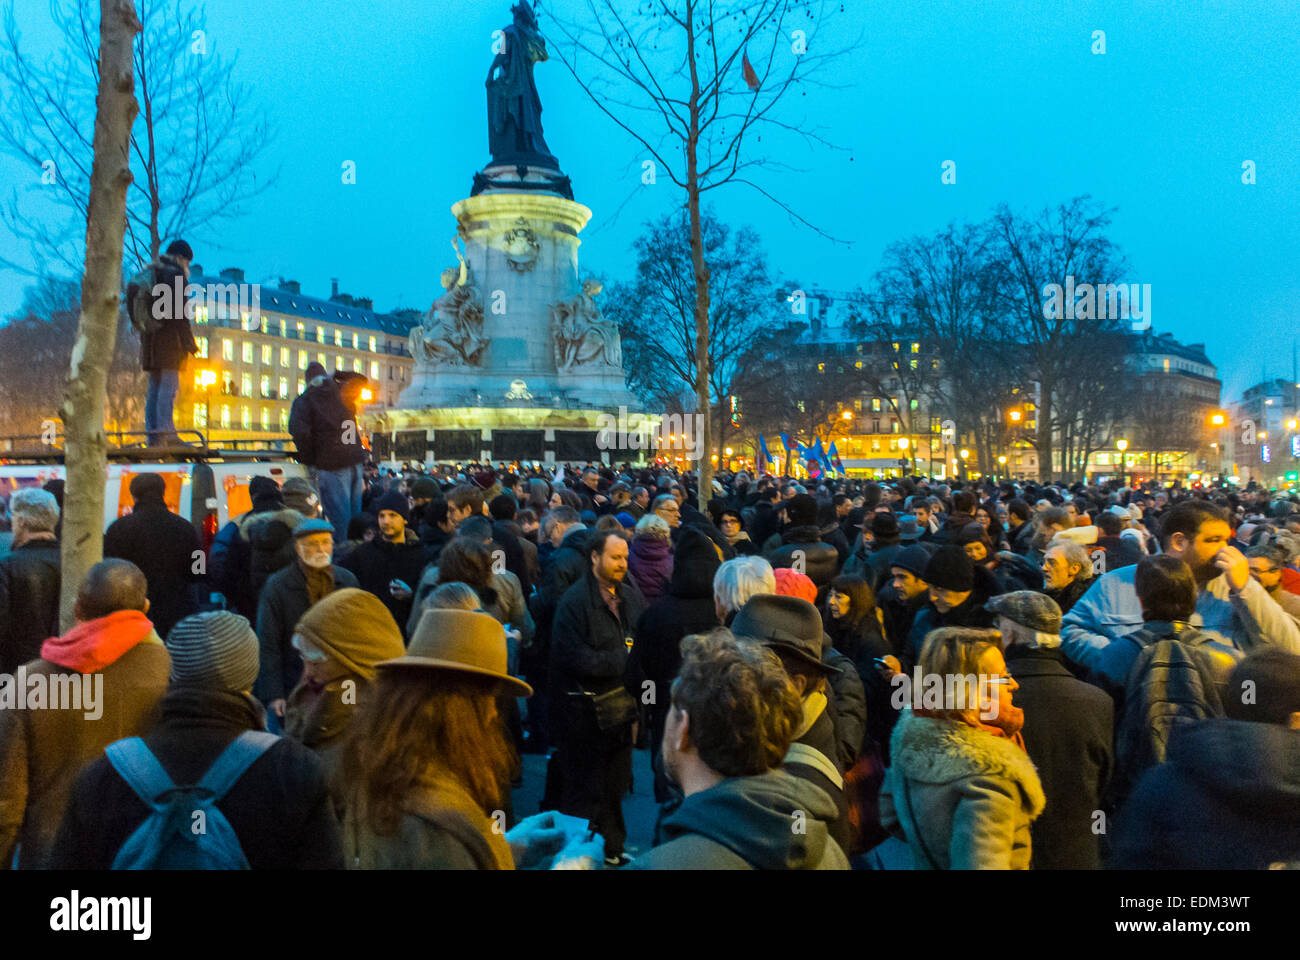 Paris, France. Demonstration against terrorism after Shooting attack on French Newspaper  Charlie Hebdo, Crowd Protest Mourners women night protest, crowd scene, 'je suis Charlie Paris' paris republique demonstration Stock Photo